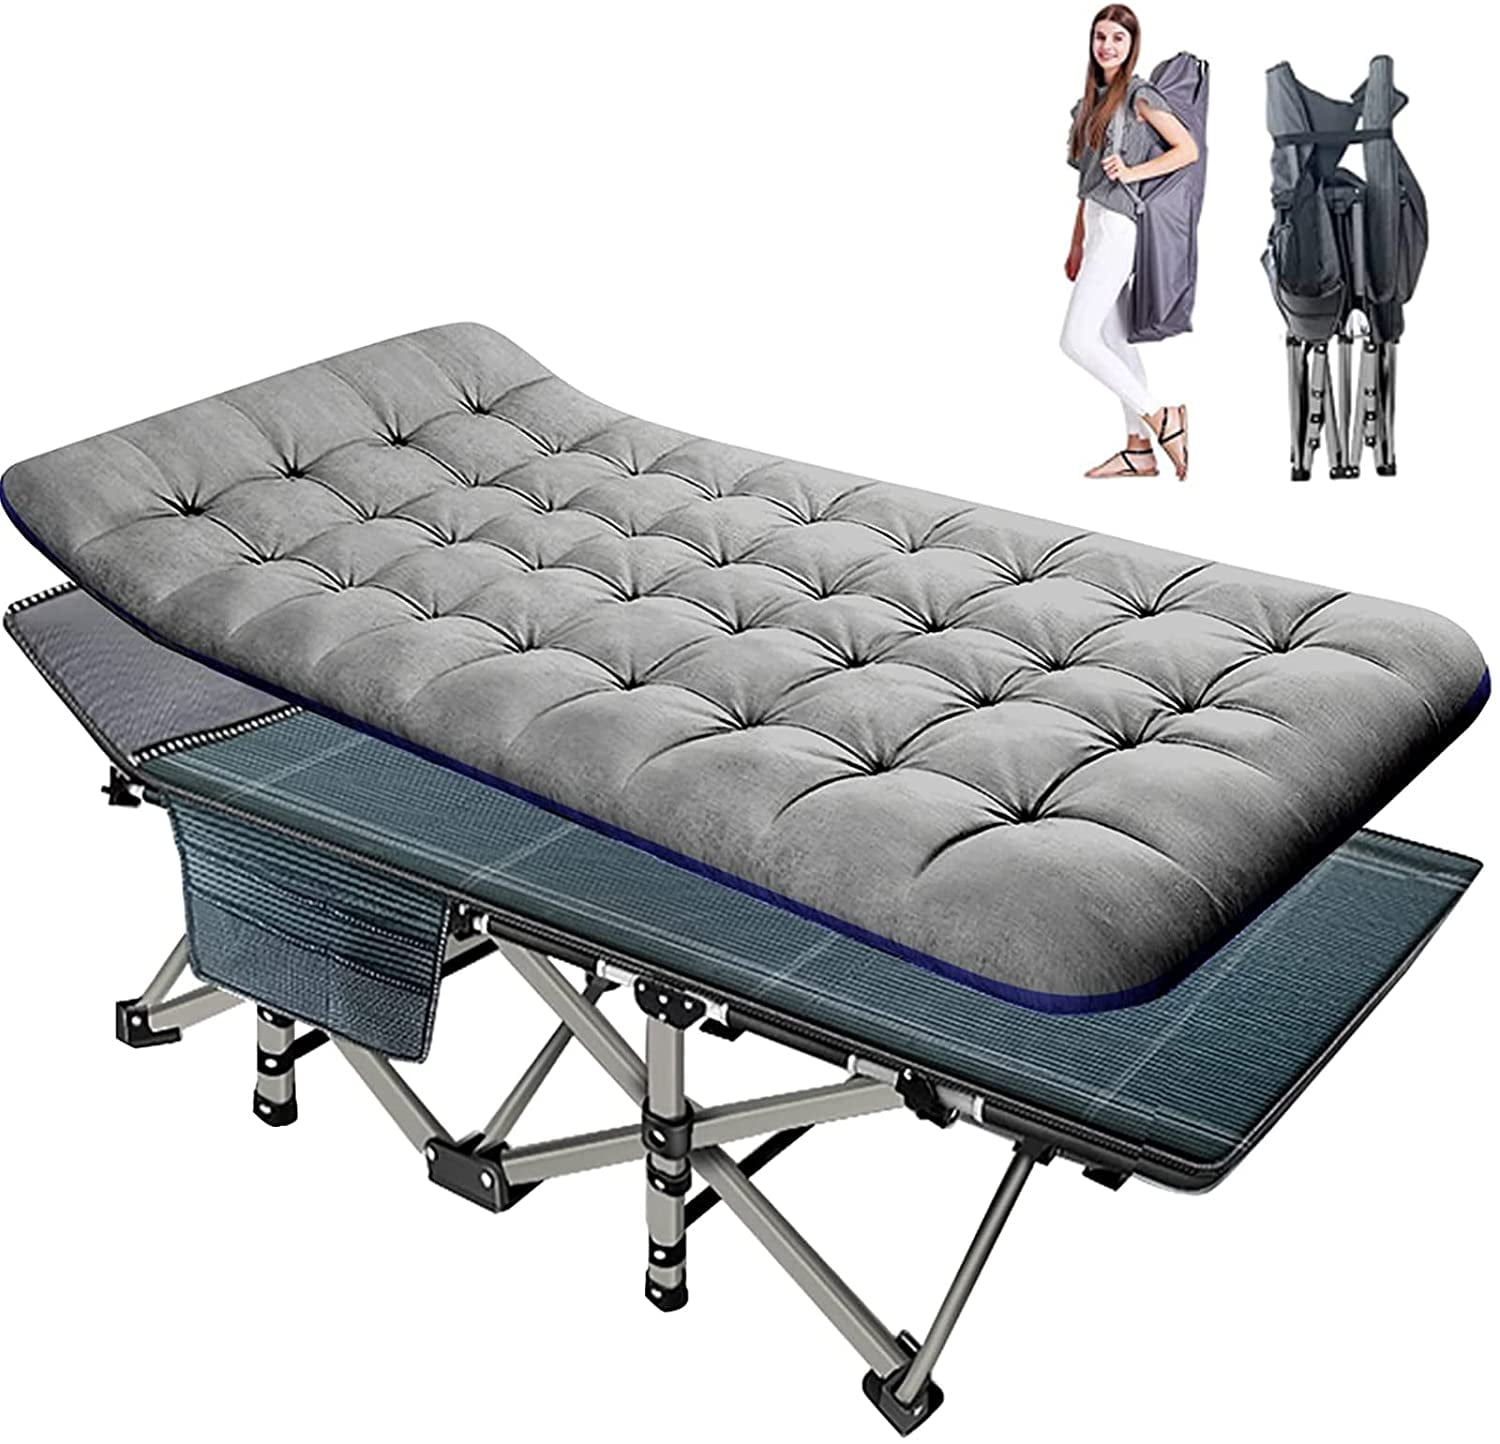 Double Layer 1200D Folding Cots Portable W/Mattress Heavy Duty Sleeping Cots W/Carrying Bag ABORON Camping Cots Adults 